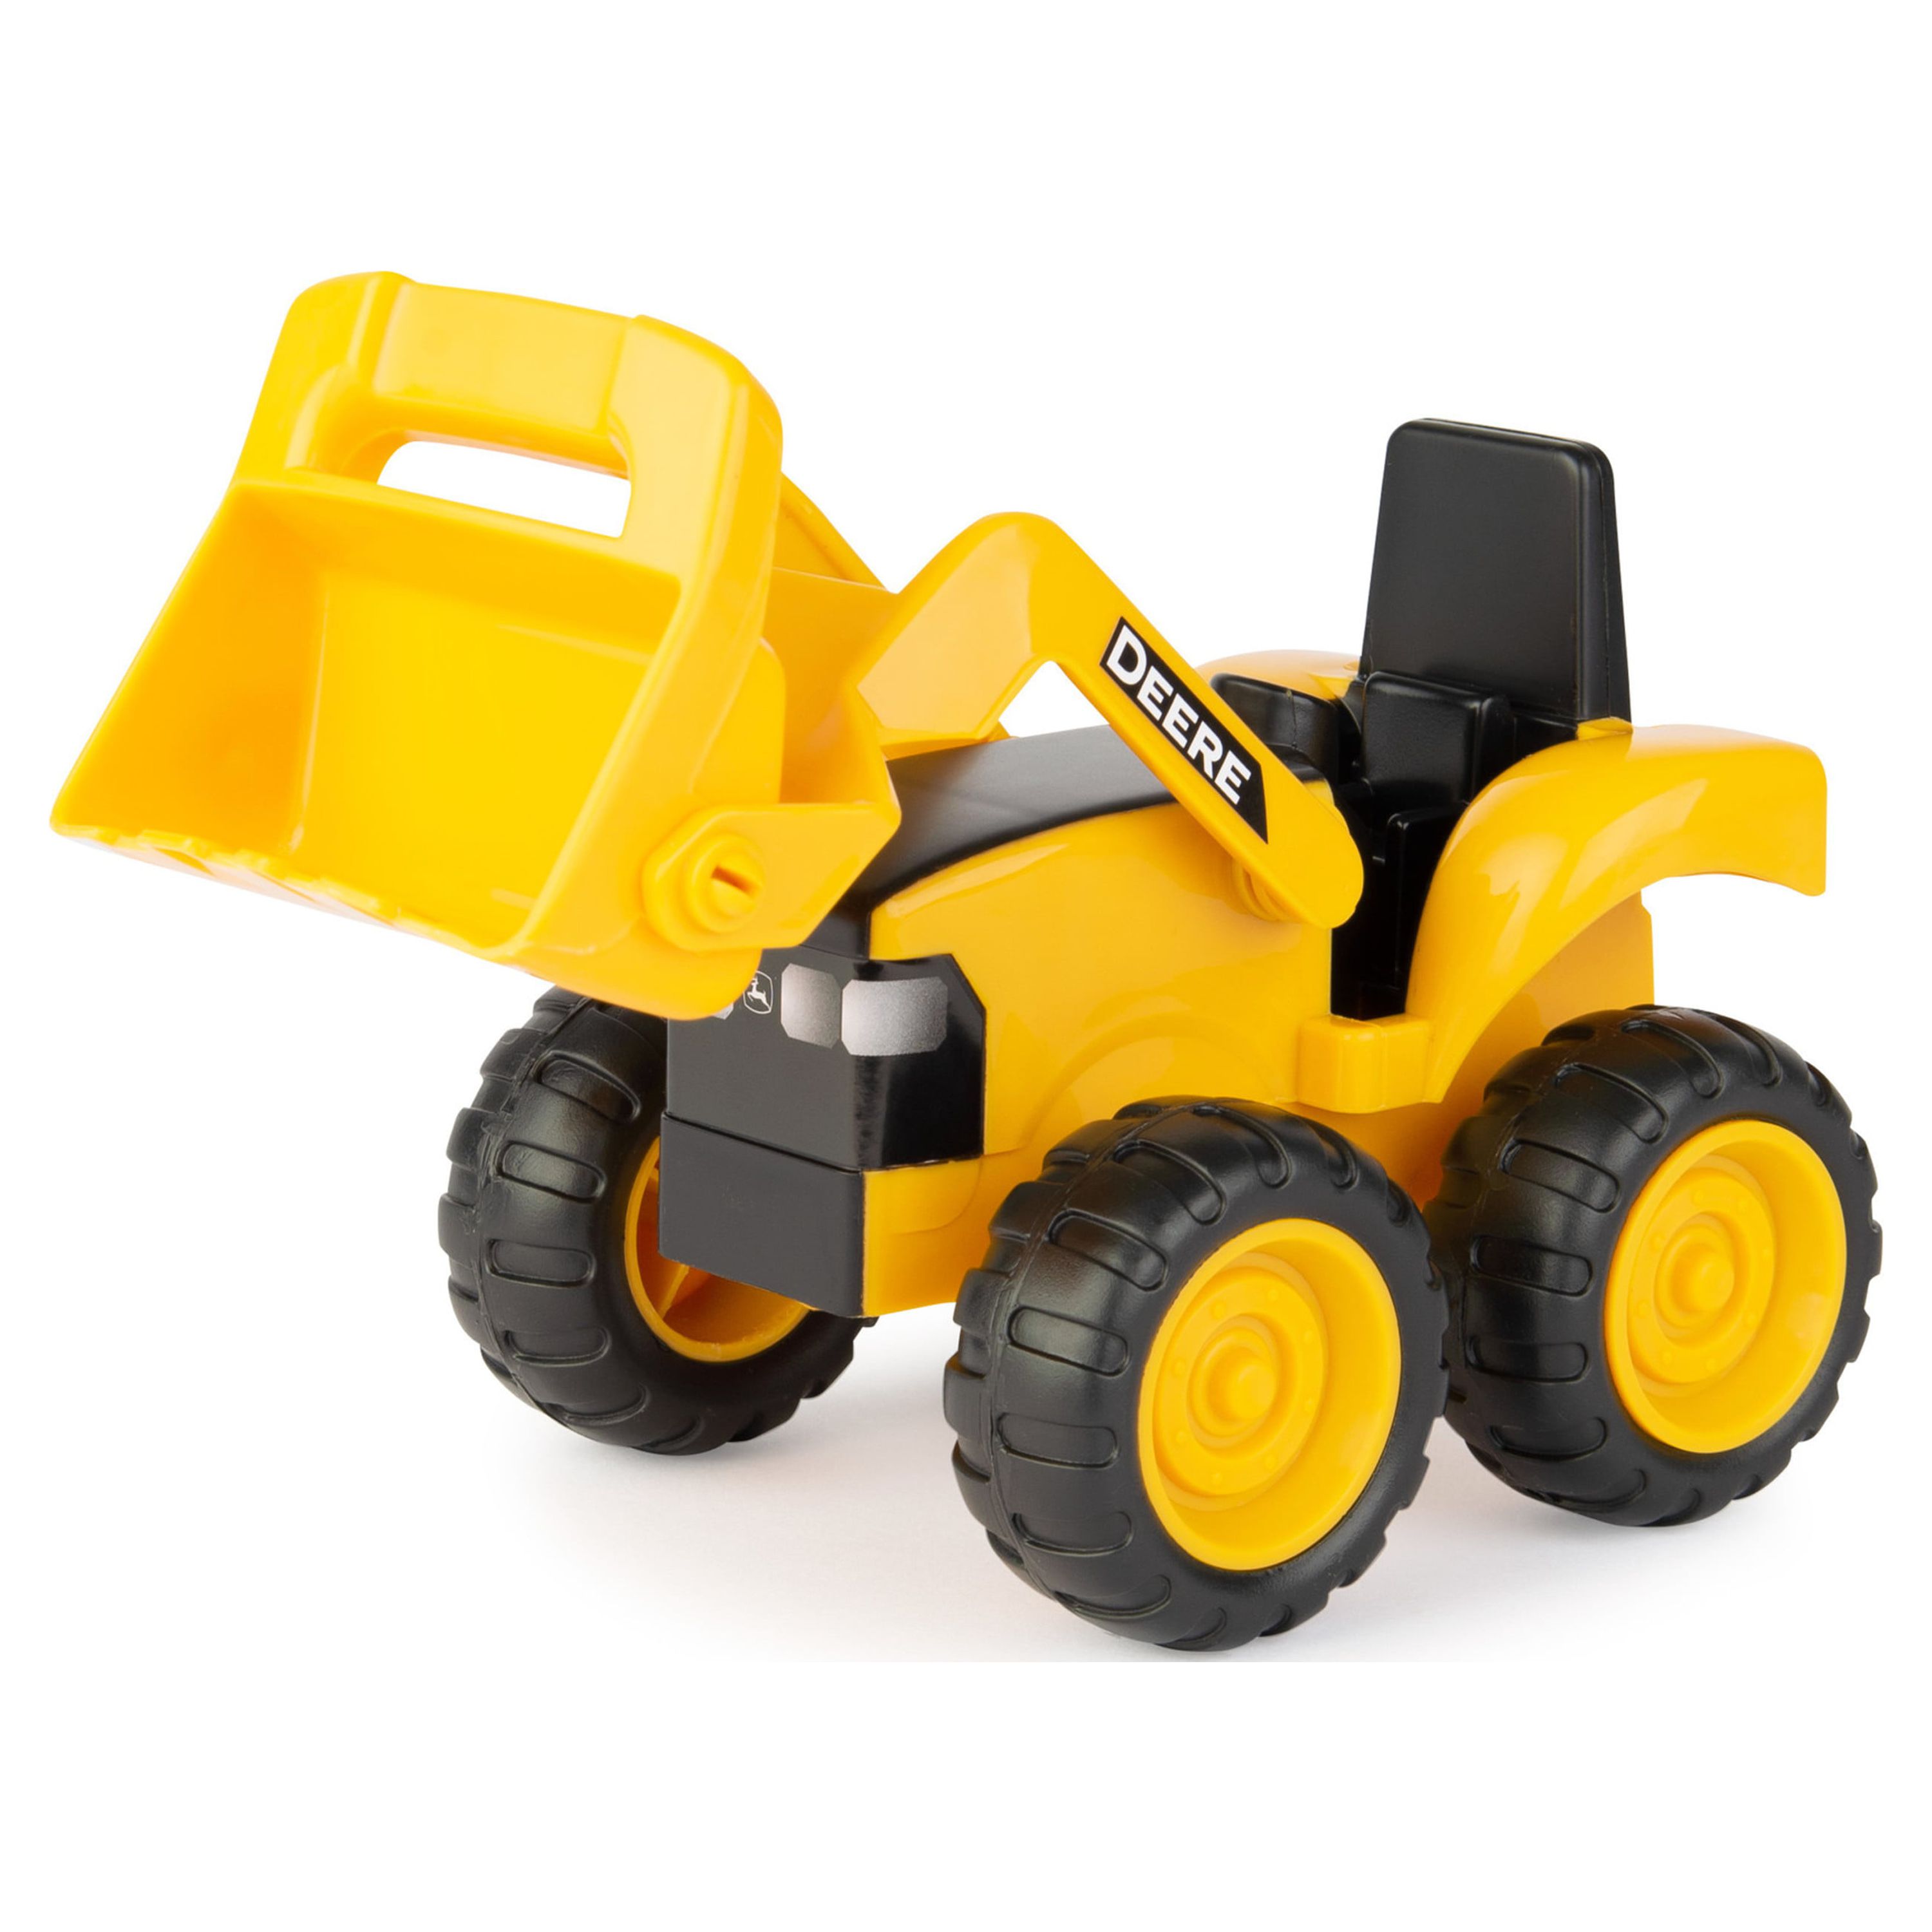 John Deere Sandbox 6" Construction Vehicle 2 Pack, Dump Truck & Tractor with Loader, Yellow - image 4 of 13